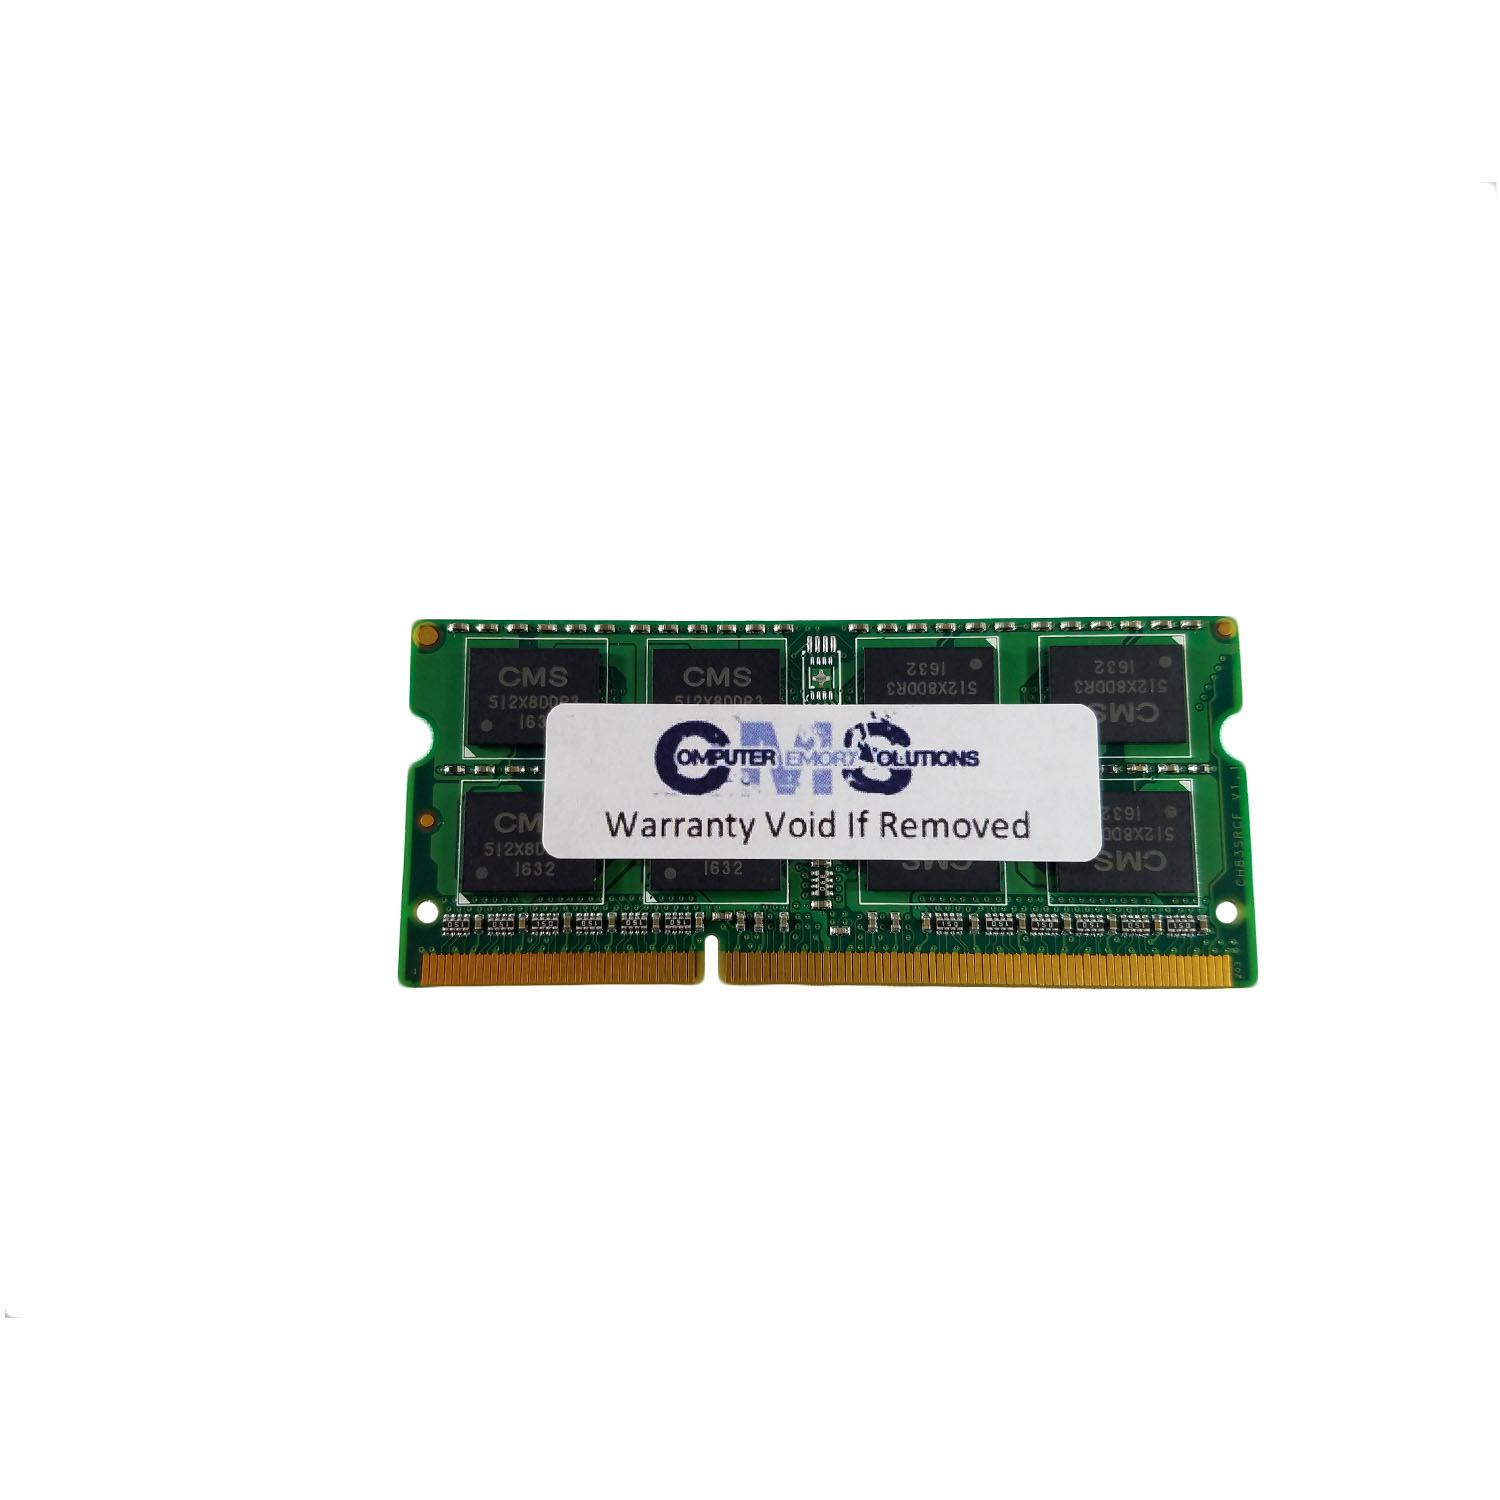 CMS 4GB (1X4GB) DDR3 8500 1066MHZ NON ECC SODIMM Memory Ram Upgrade Compatible with Asrock® Mini Pc Vision 3D 137B, Pc Vision 3D 137D - A34 - image 1 of 2